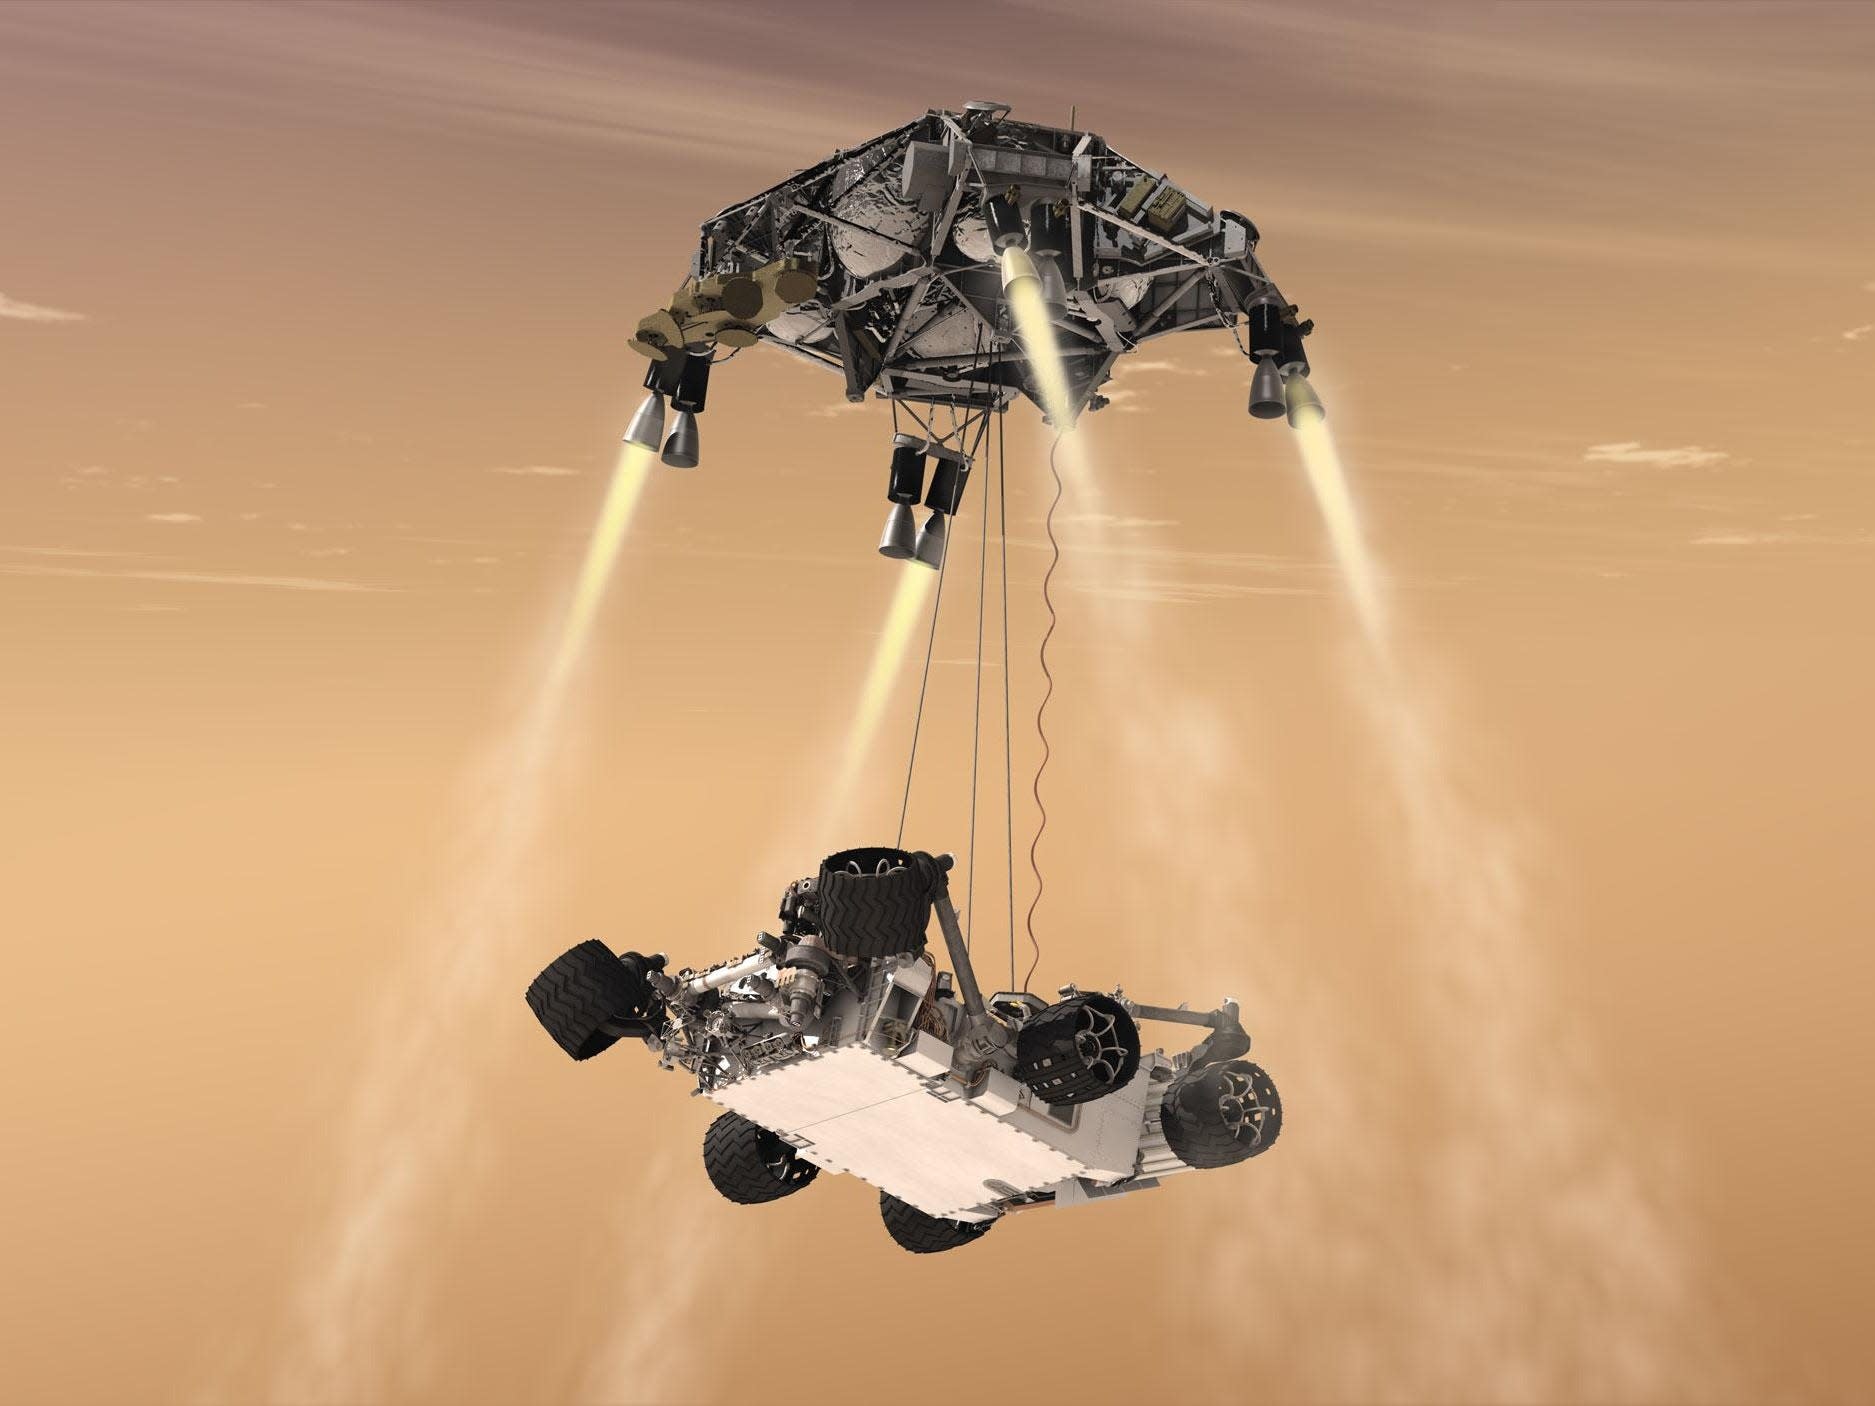 NASA’s Perseverance Rover is about to attempt a supersonic dive to Mars, complete with a jetpack landing